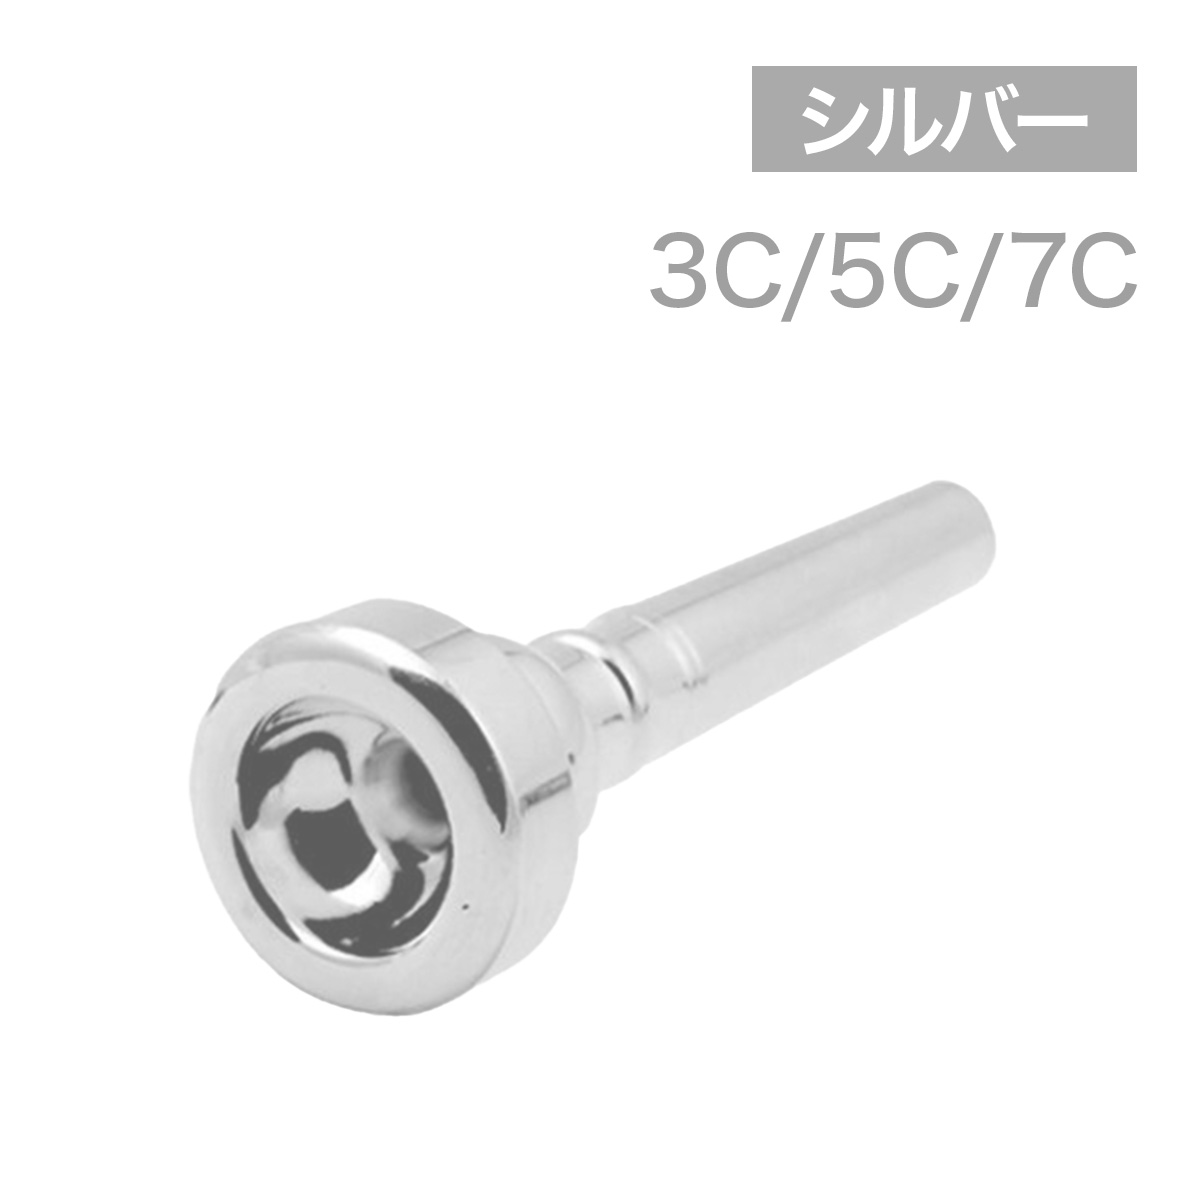  trumpet mouthpiece 3C 5C 7C silver wind instrumental music free shipping 